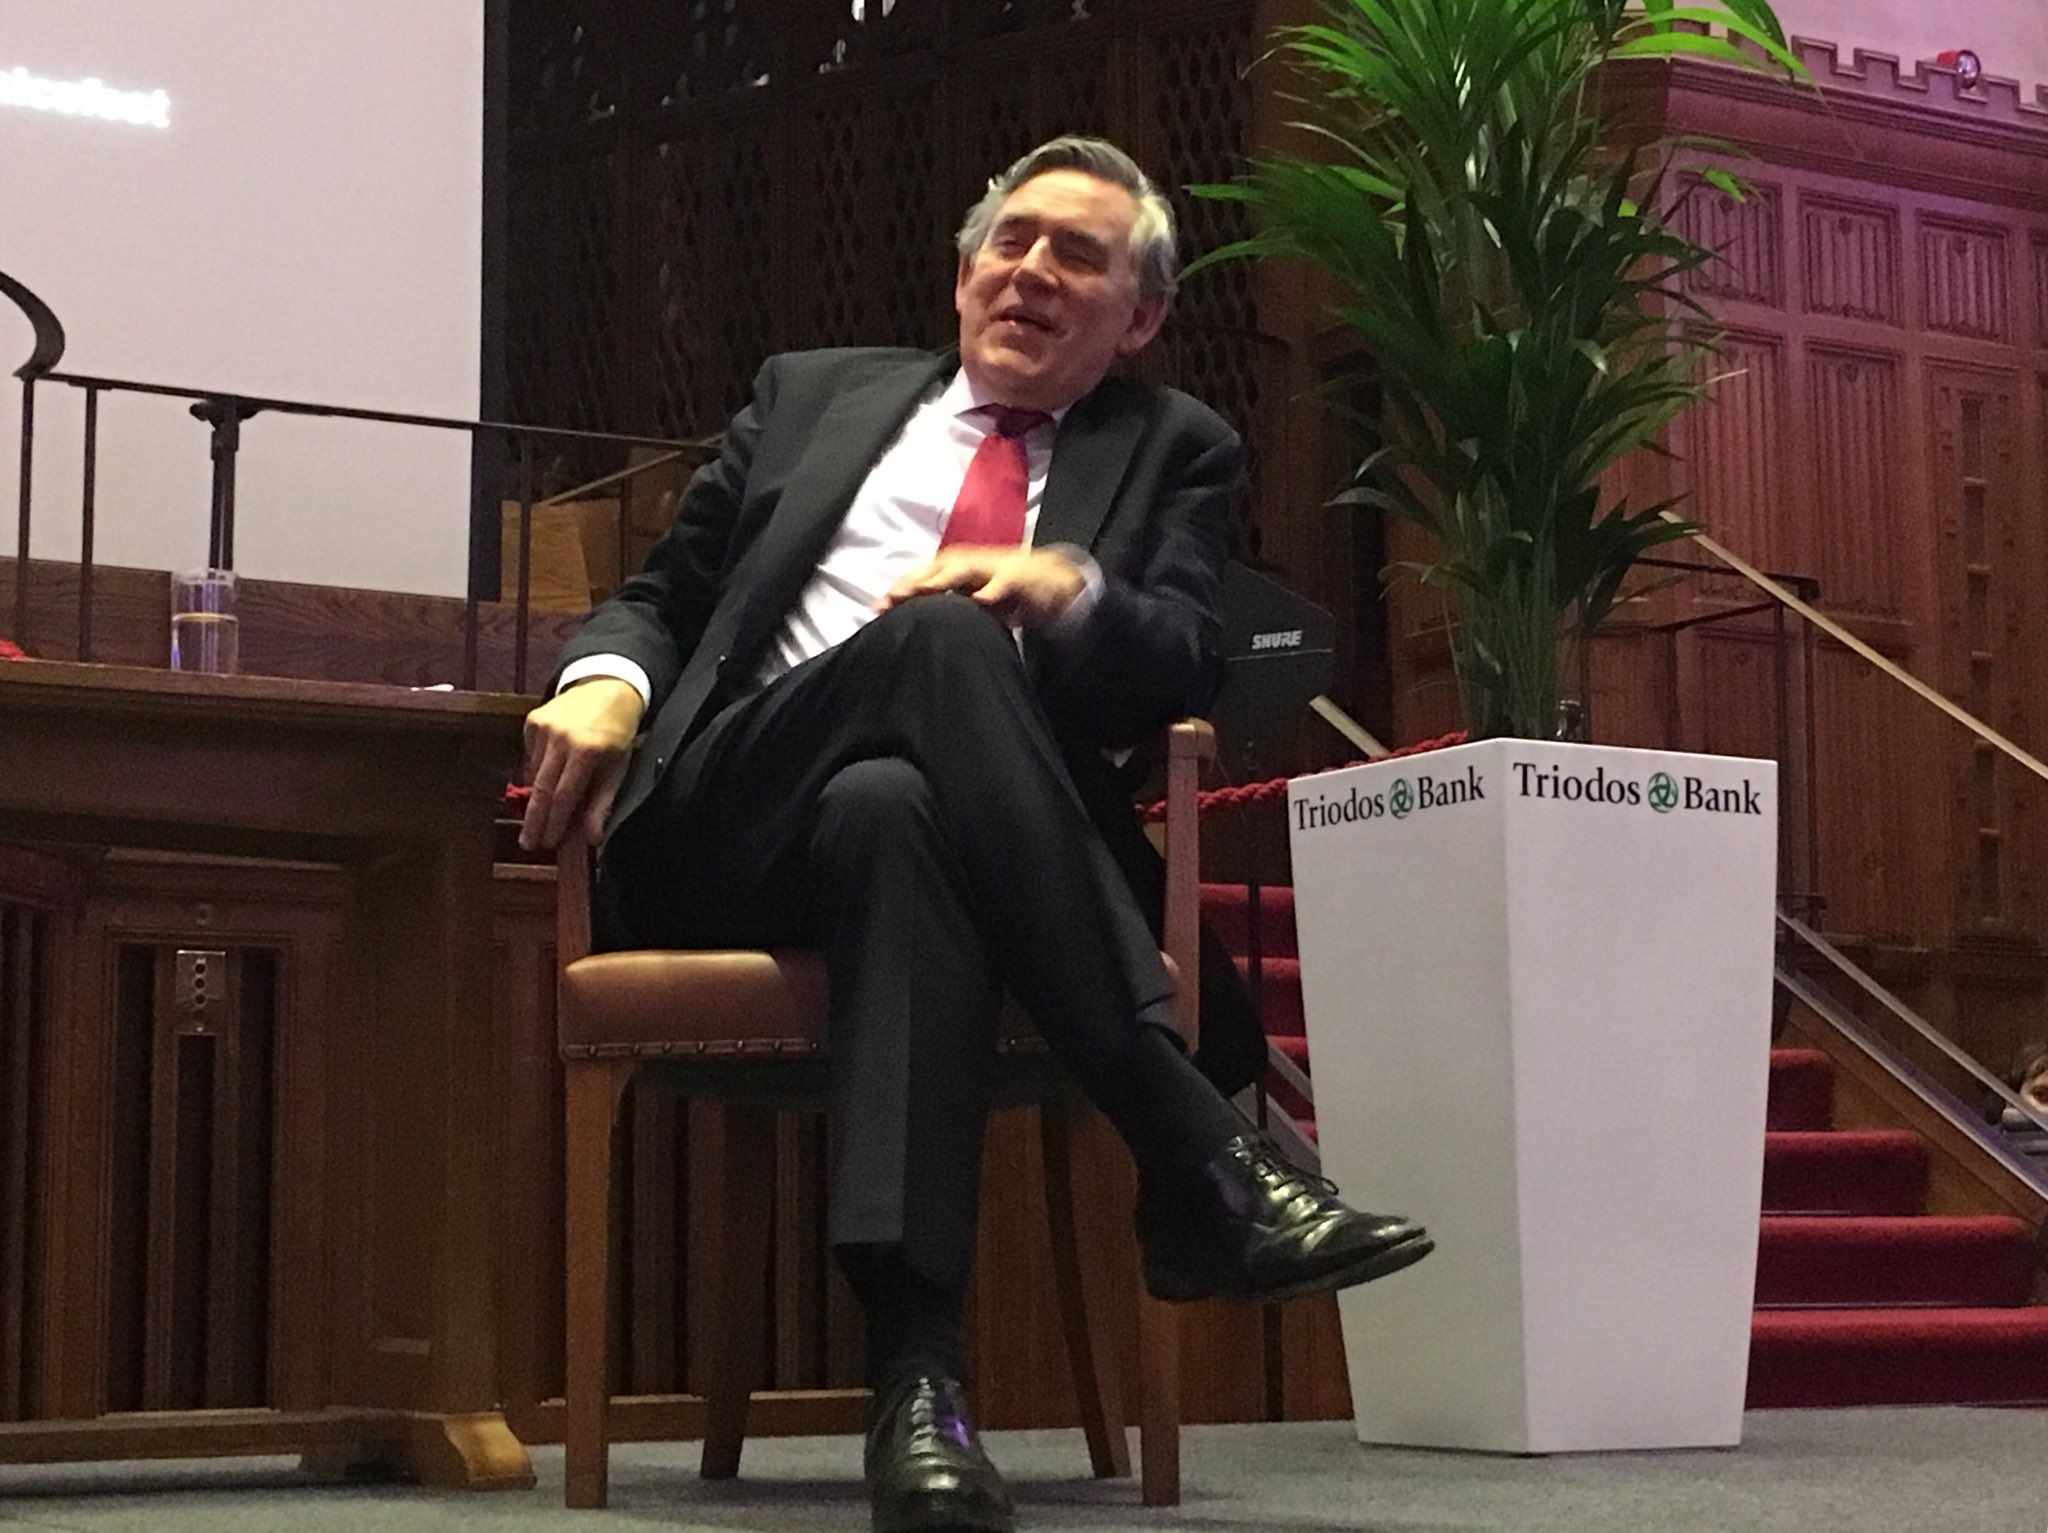 Gordon Brown spoke on his feet for 45 mins then took some pre-submitted questions. #economicsfest https://t.co/BVQ9wuo8bh